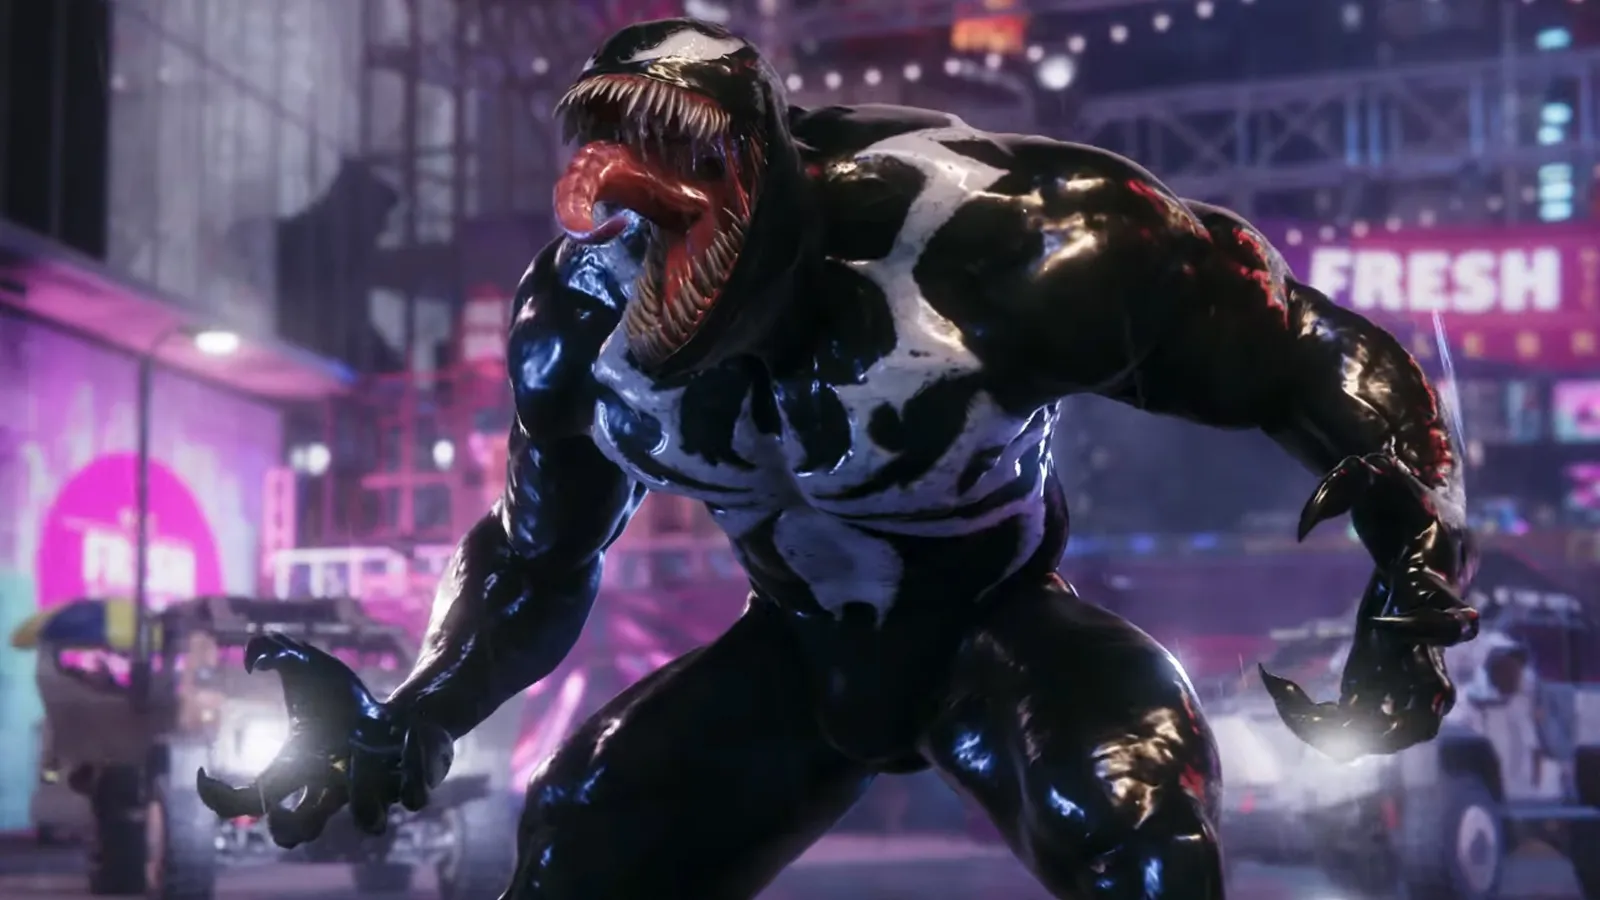 Tom Hardy Comments On Spider-Man 2's Venom